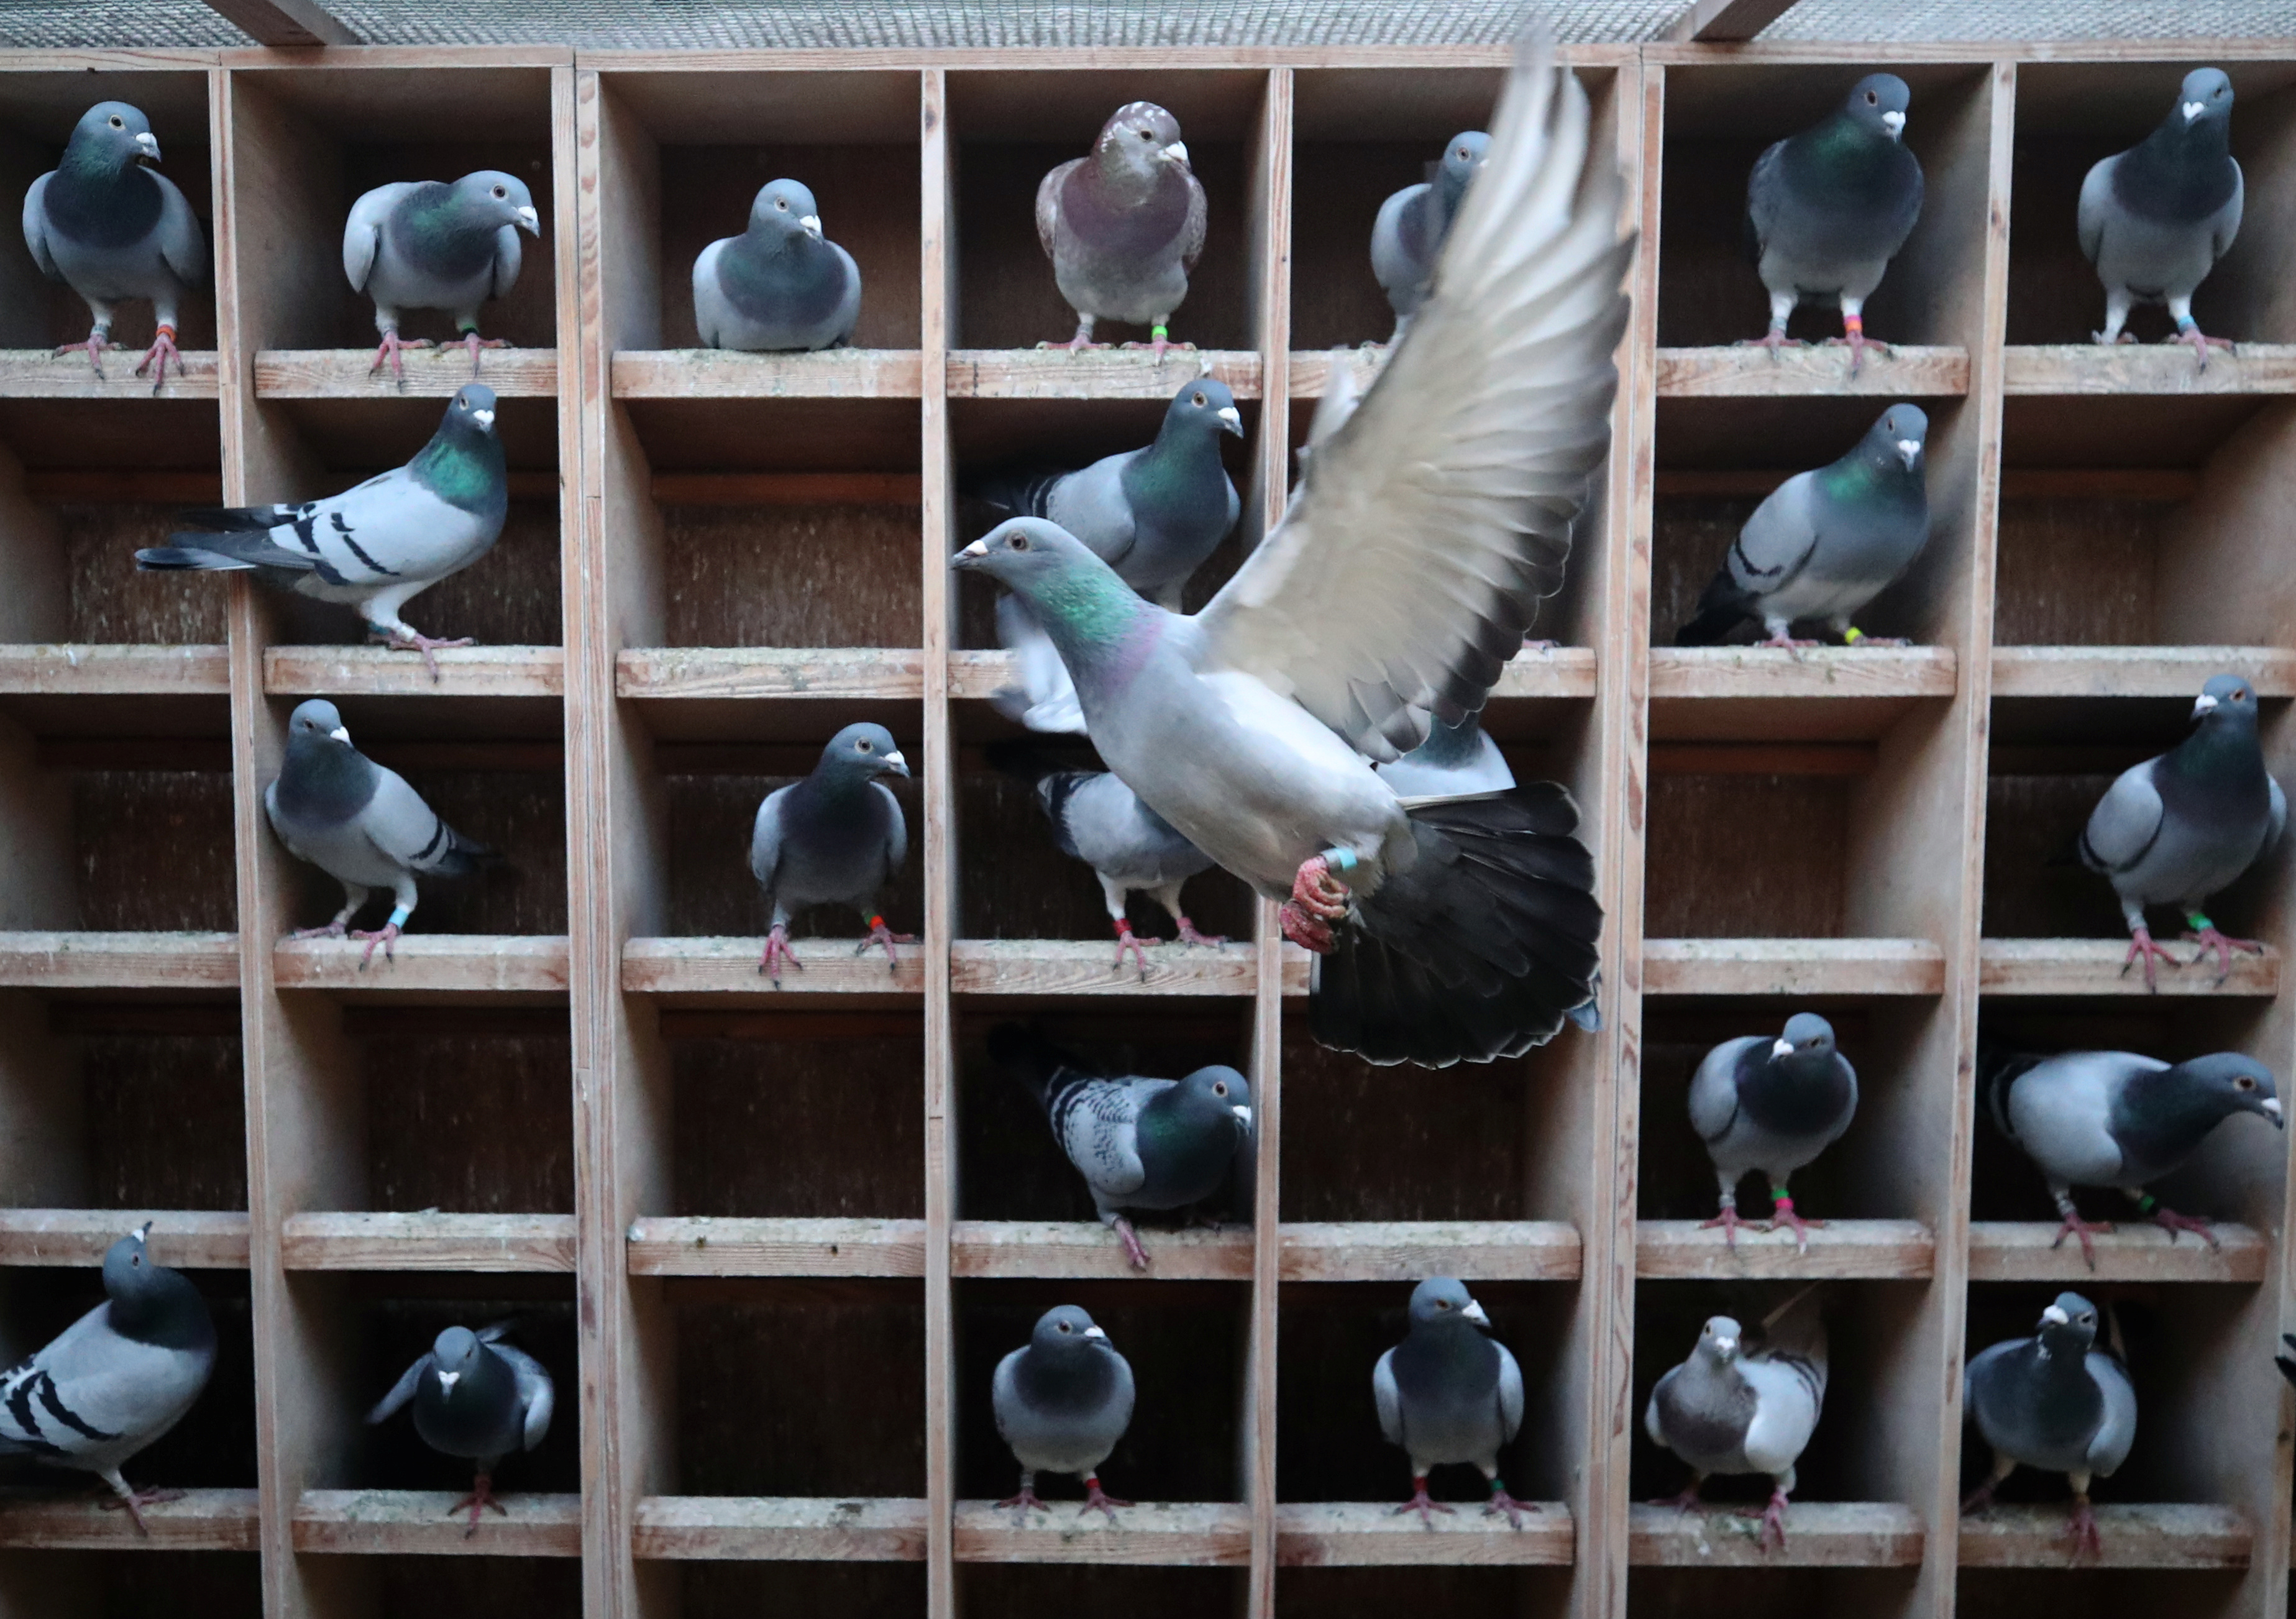 The world's most expensive pigeon is a Belgian racing bird worth 1.8m